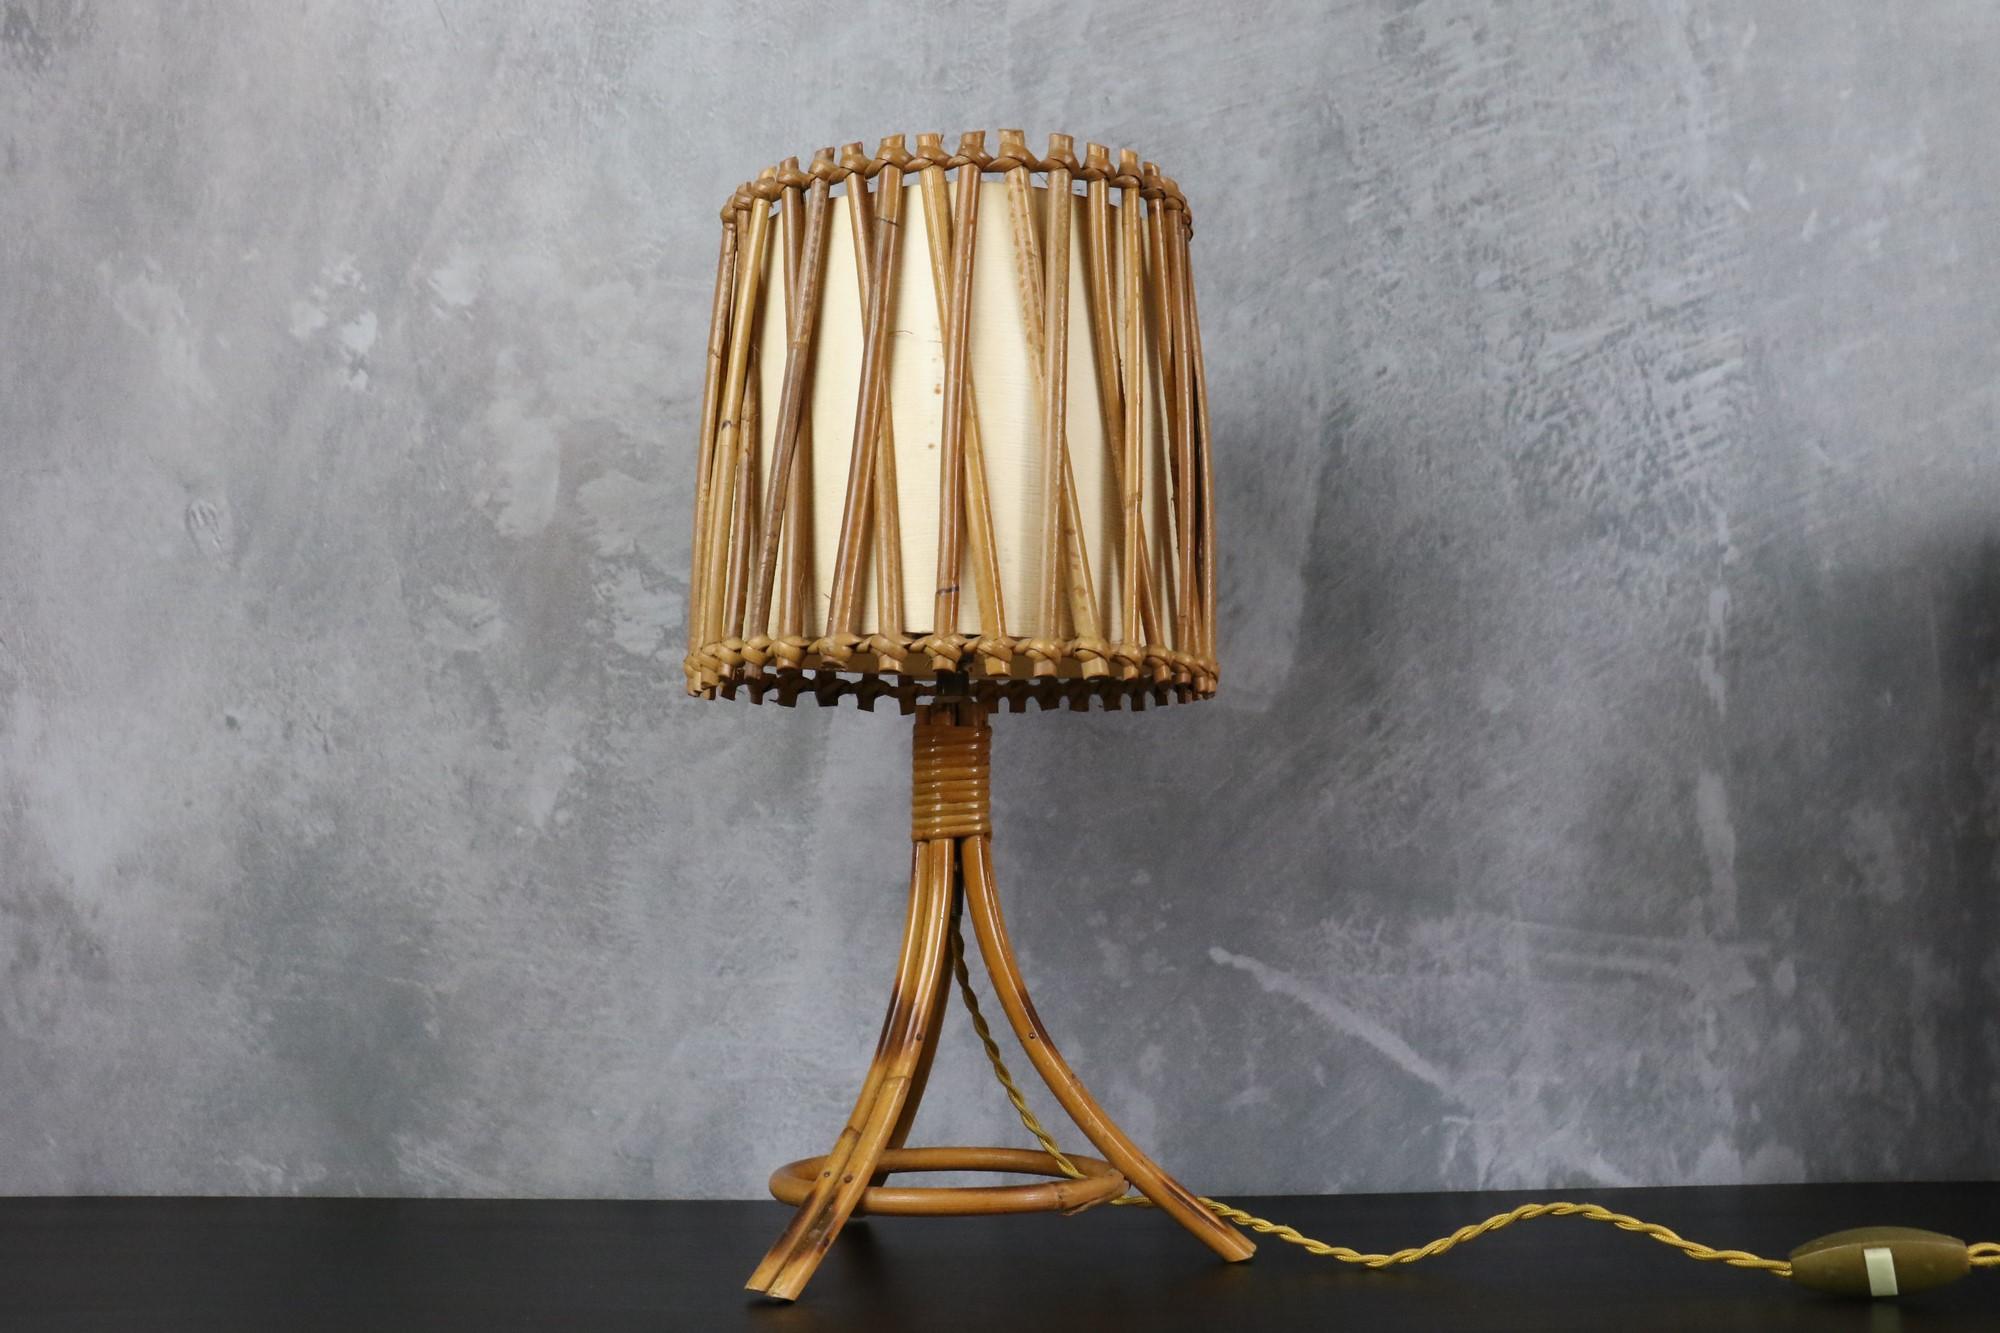 French Louis Sognot Bamboo and Rattan Table Lamp Mid-Century Modern 1960, France